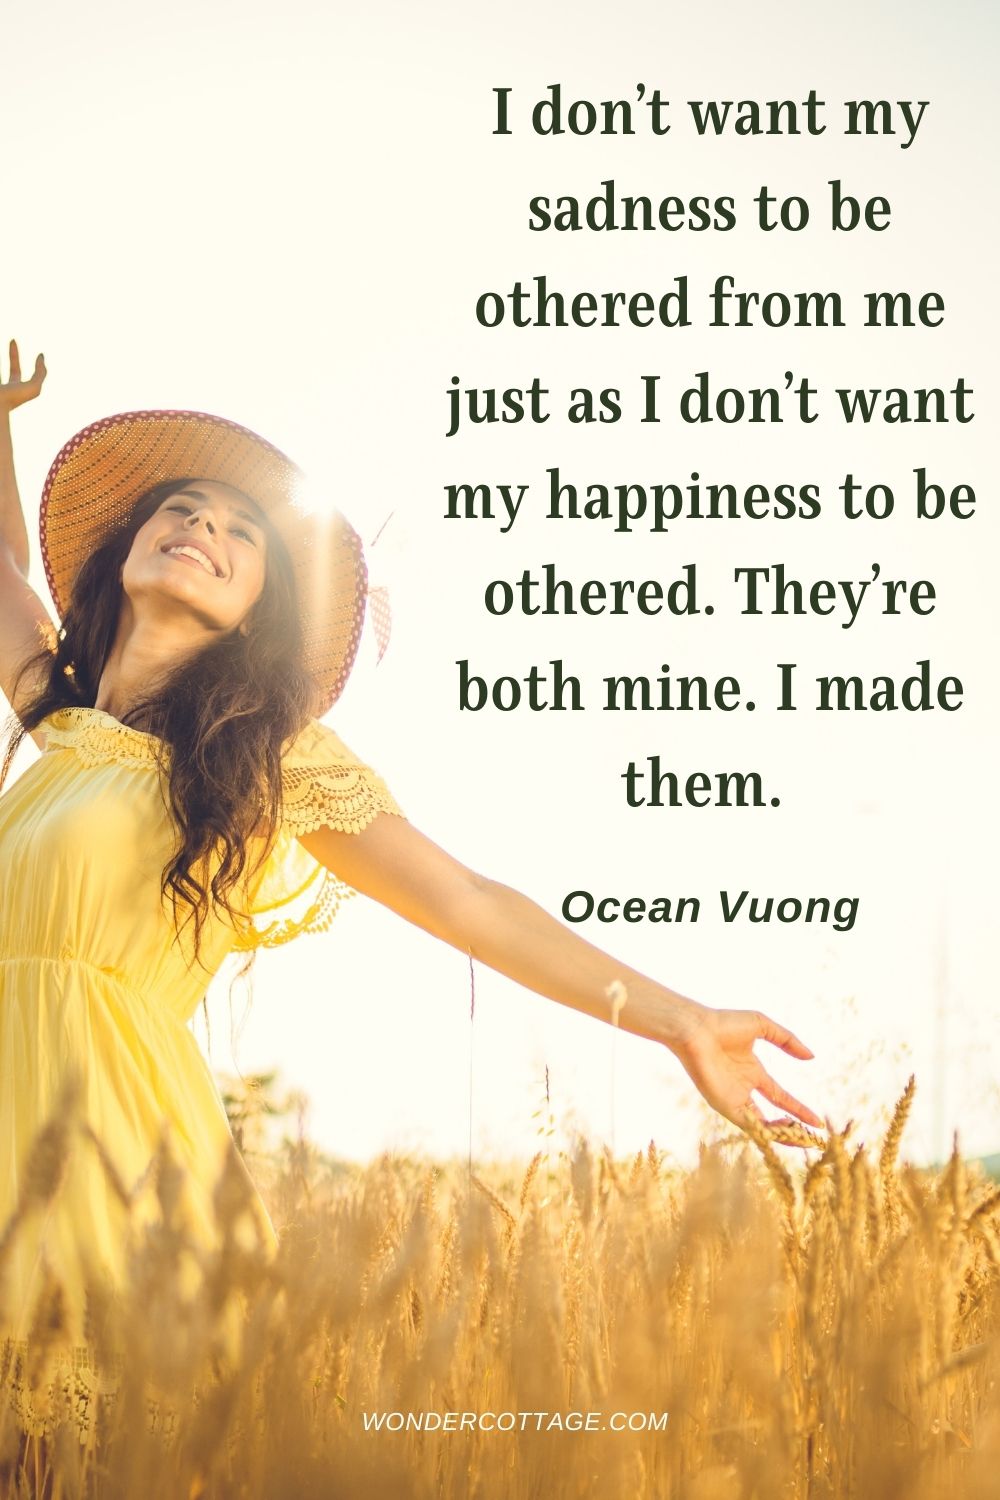 I don’t want my sadness to be othered from me just as I don’t want my happiness to be othered. They’re both mine. I made them.  Ocean Vuong